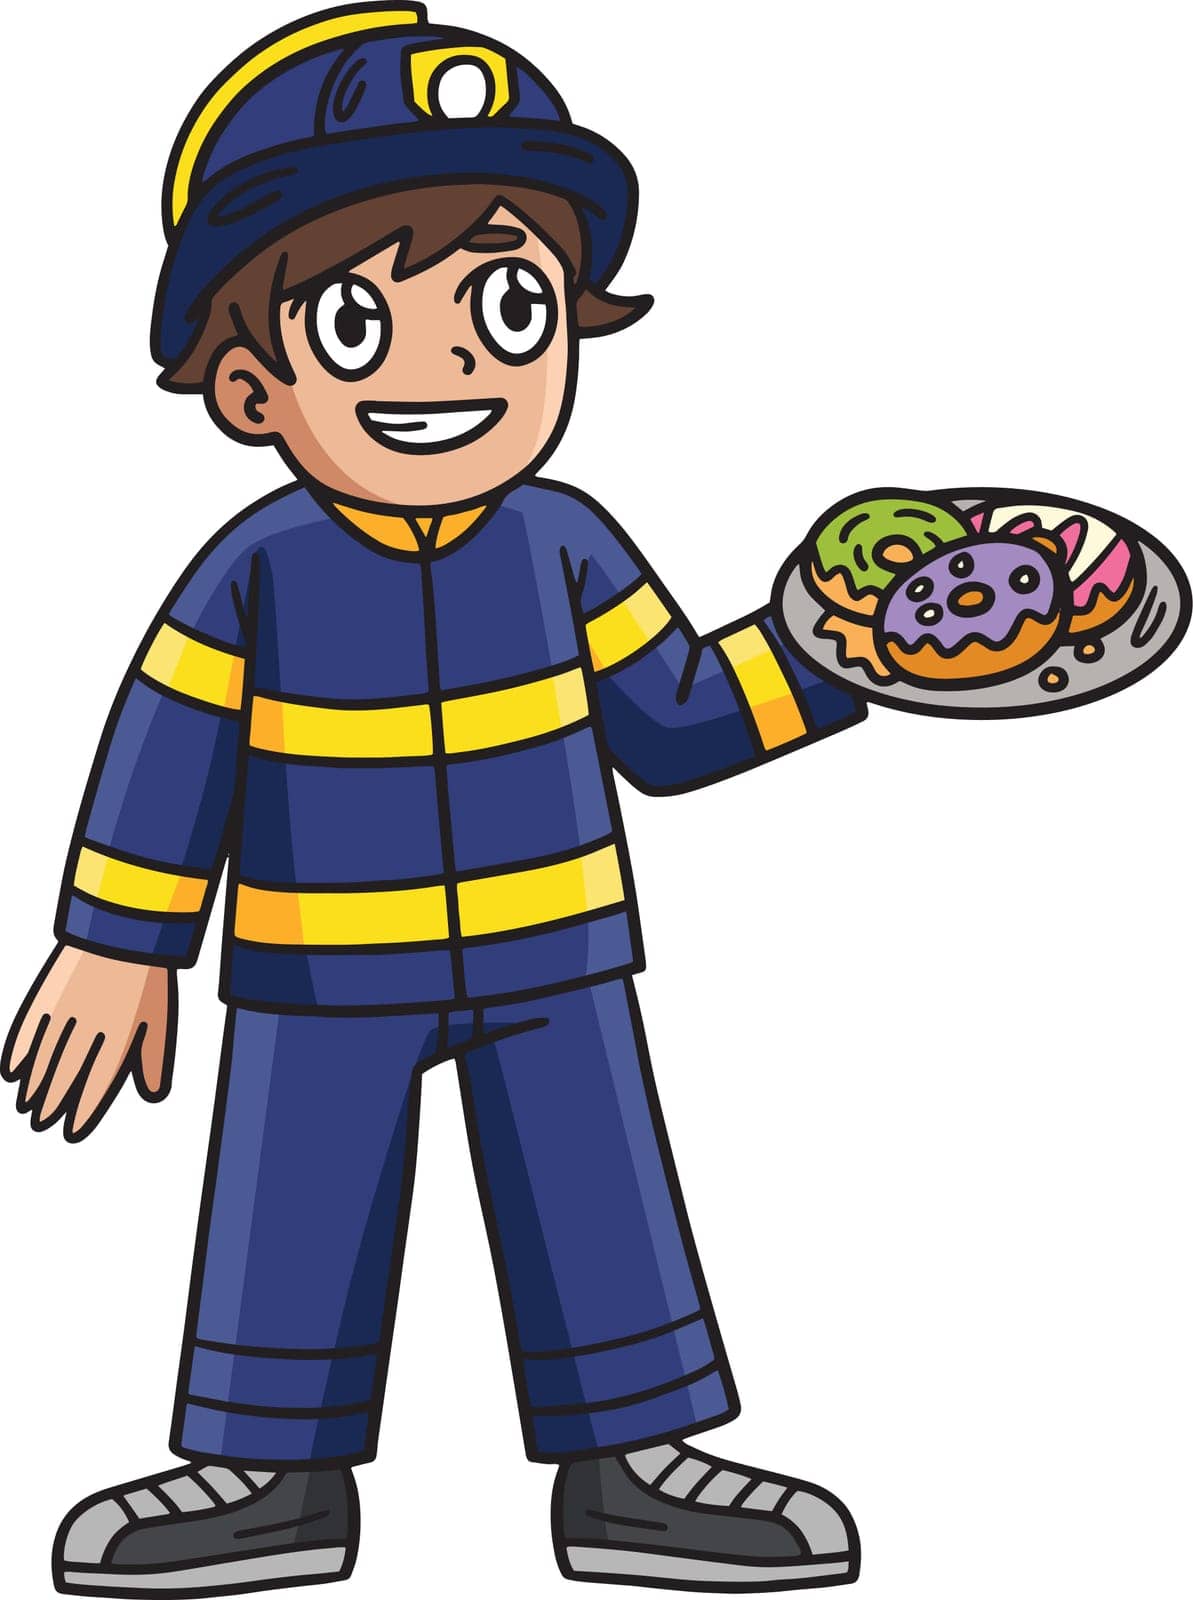 Firefighter with a Donut Cartoon Colored Clipart by abbydesign